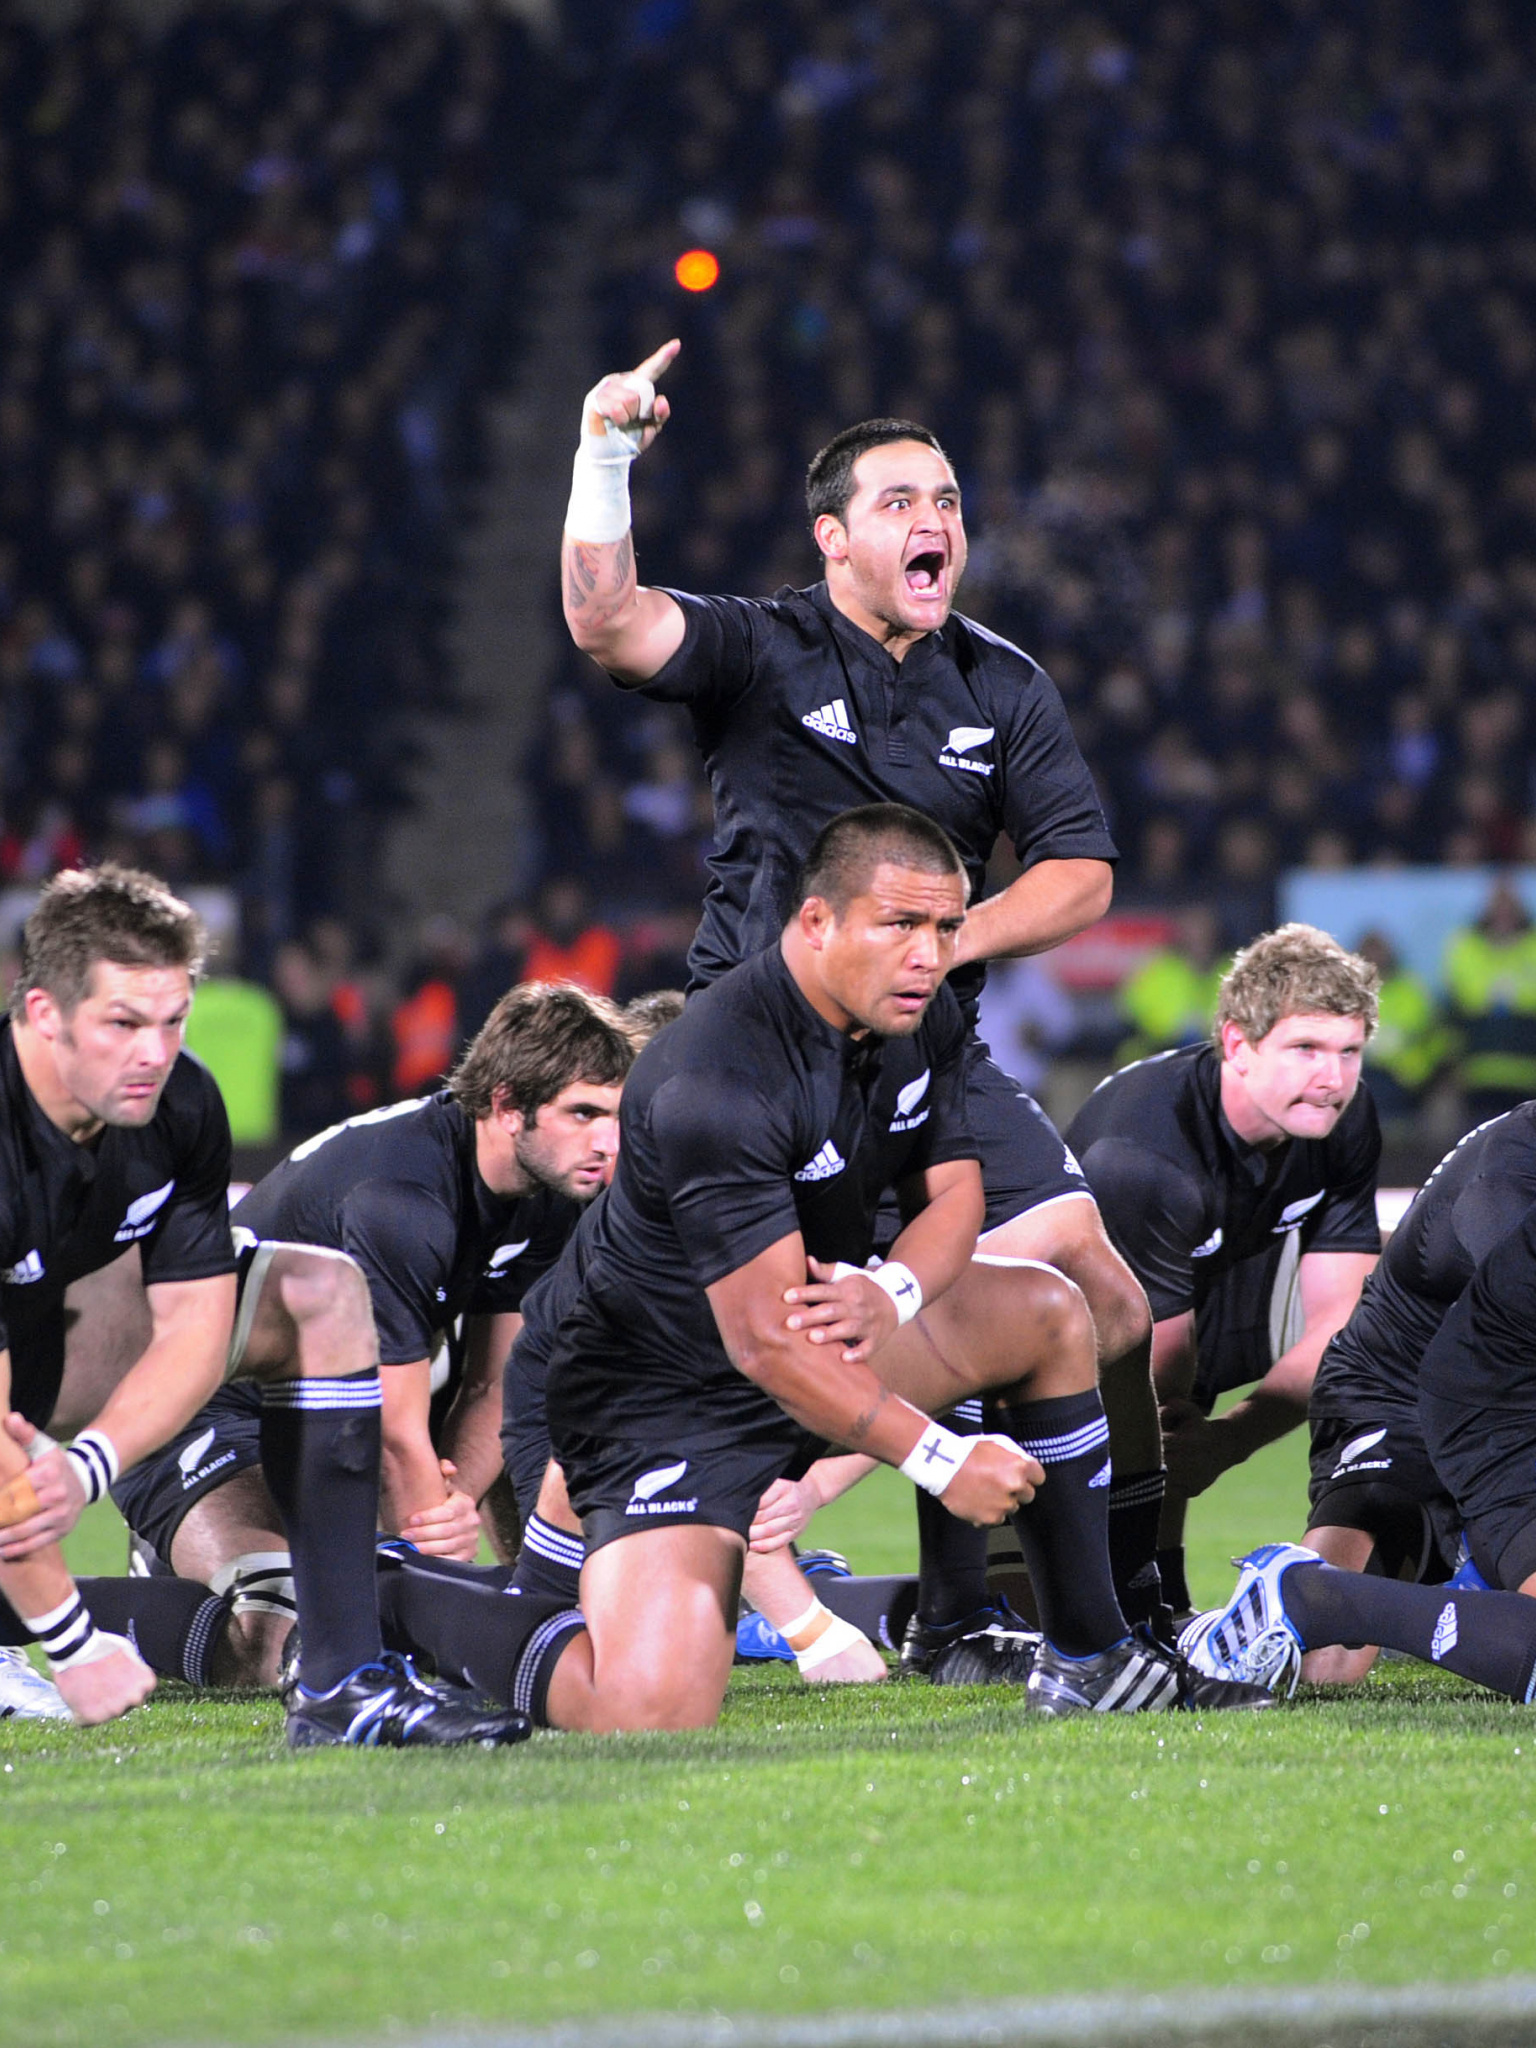 New Zealand All Blacks wallpaper, Haka tradition, Stunning landscapes, Rugby culture, 1540x2050 HD Handy